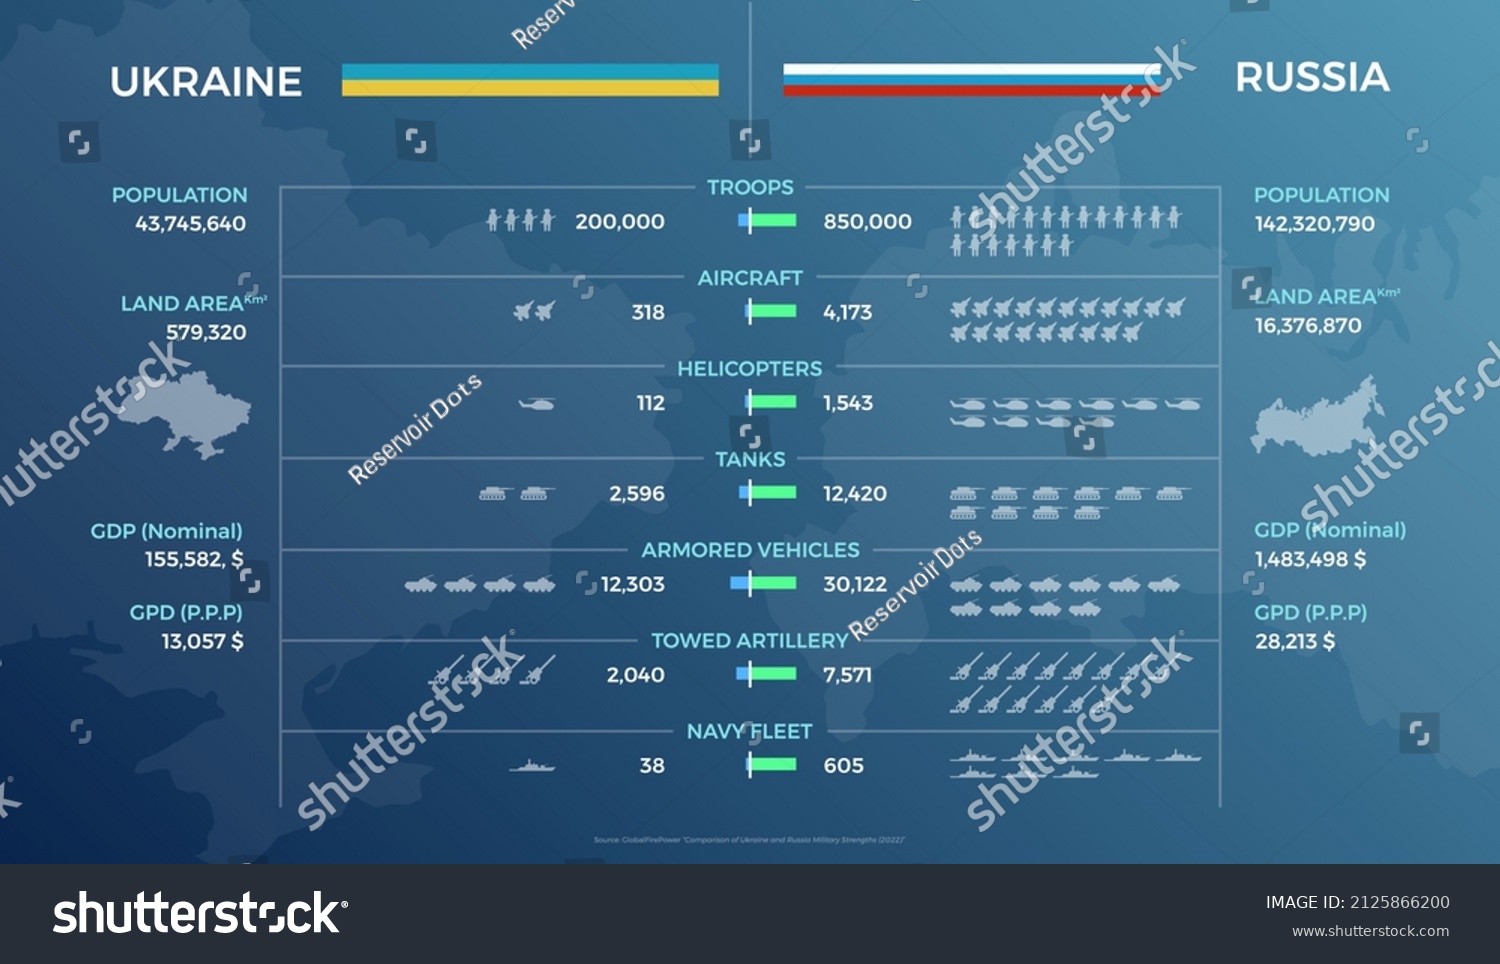 Ukraine And Russia Military Strength Comparison Vector Infographic #2125866200